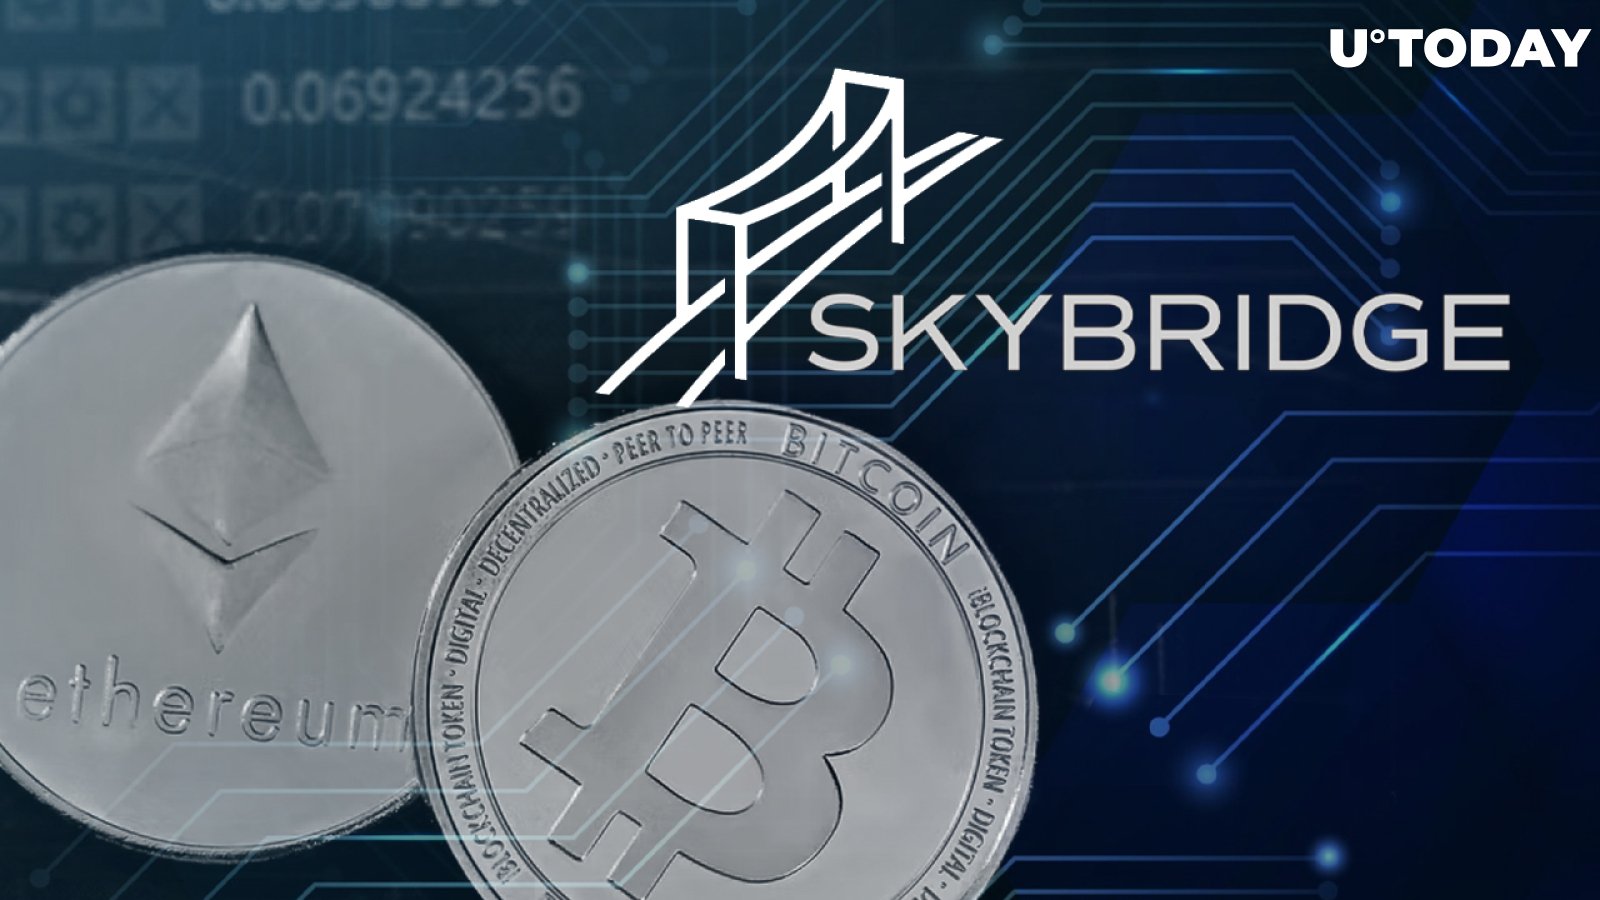 Scaramucci's SkyBridge Buys More Bitcoin, Ethereum; "Stay Disciplined," He Says to Community